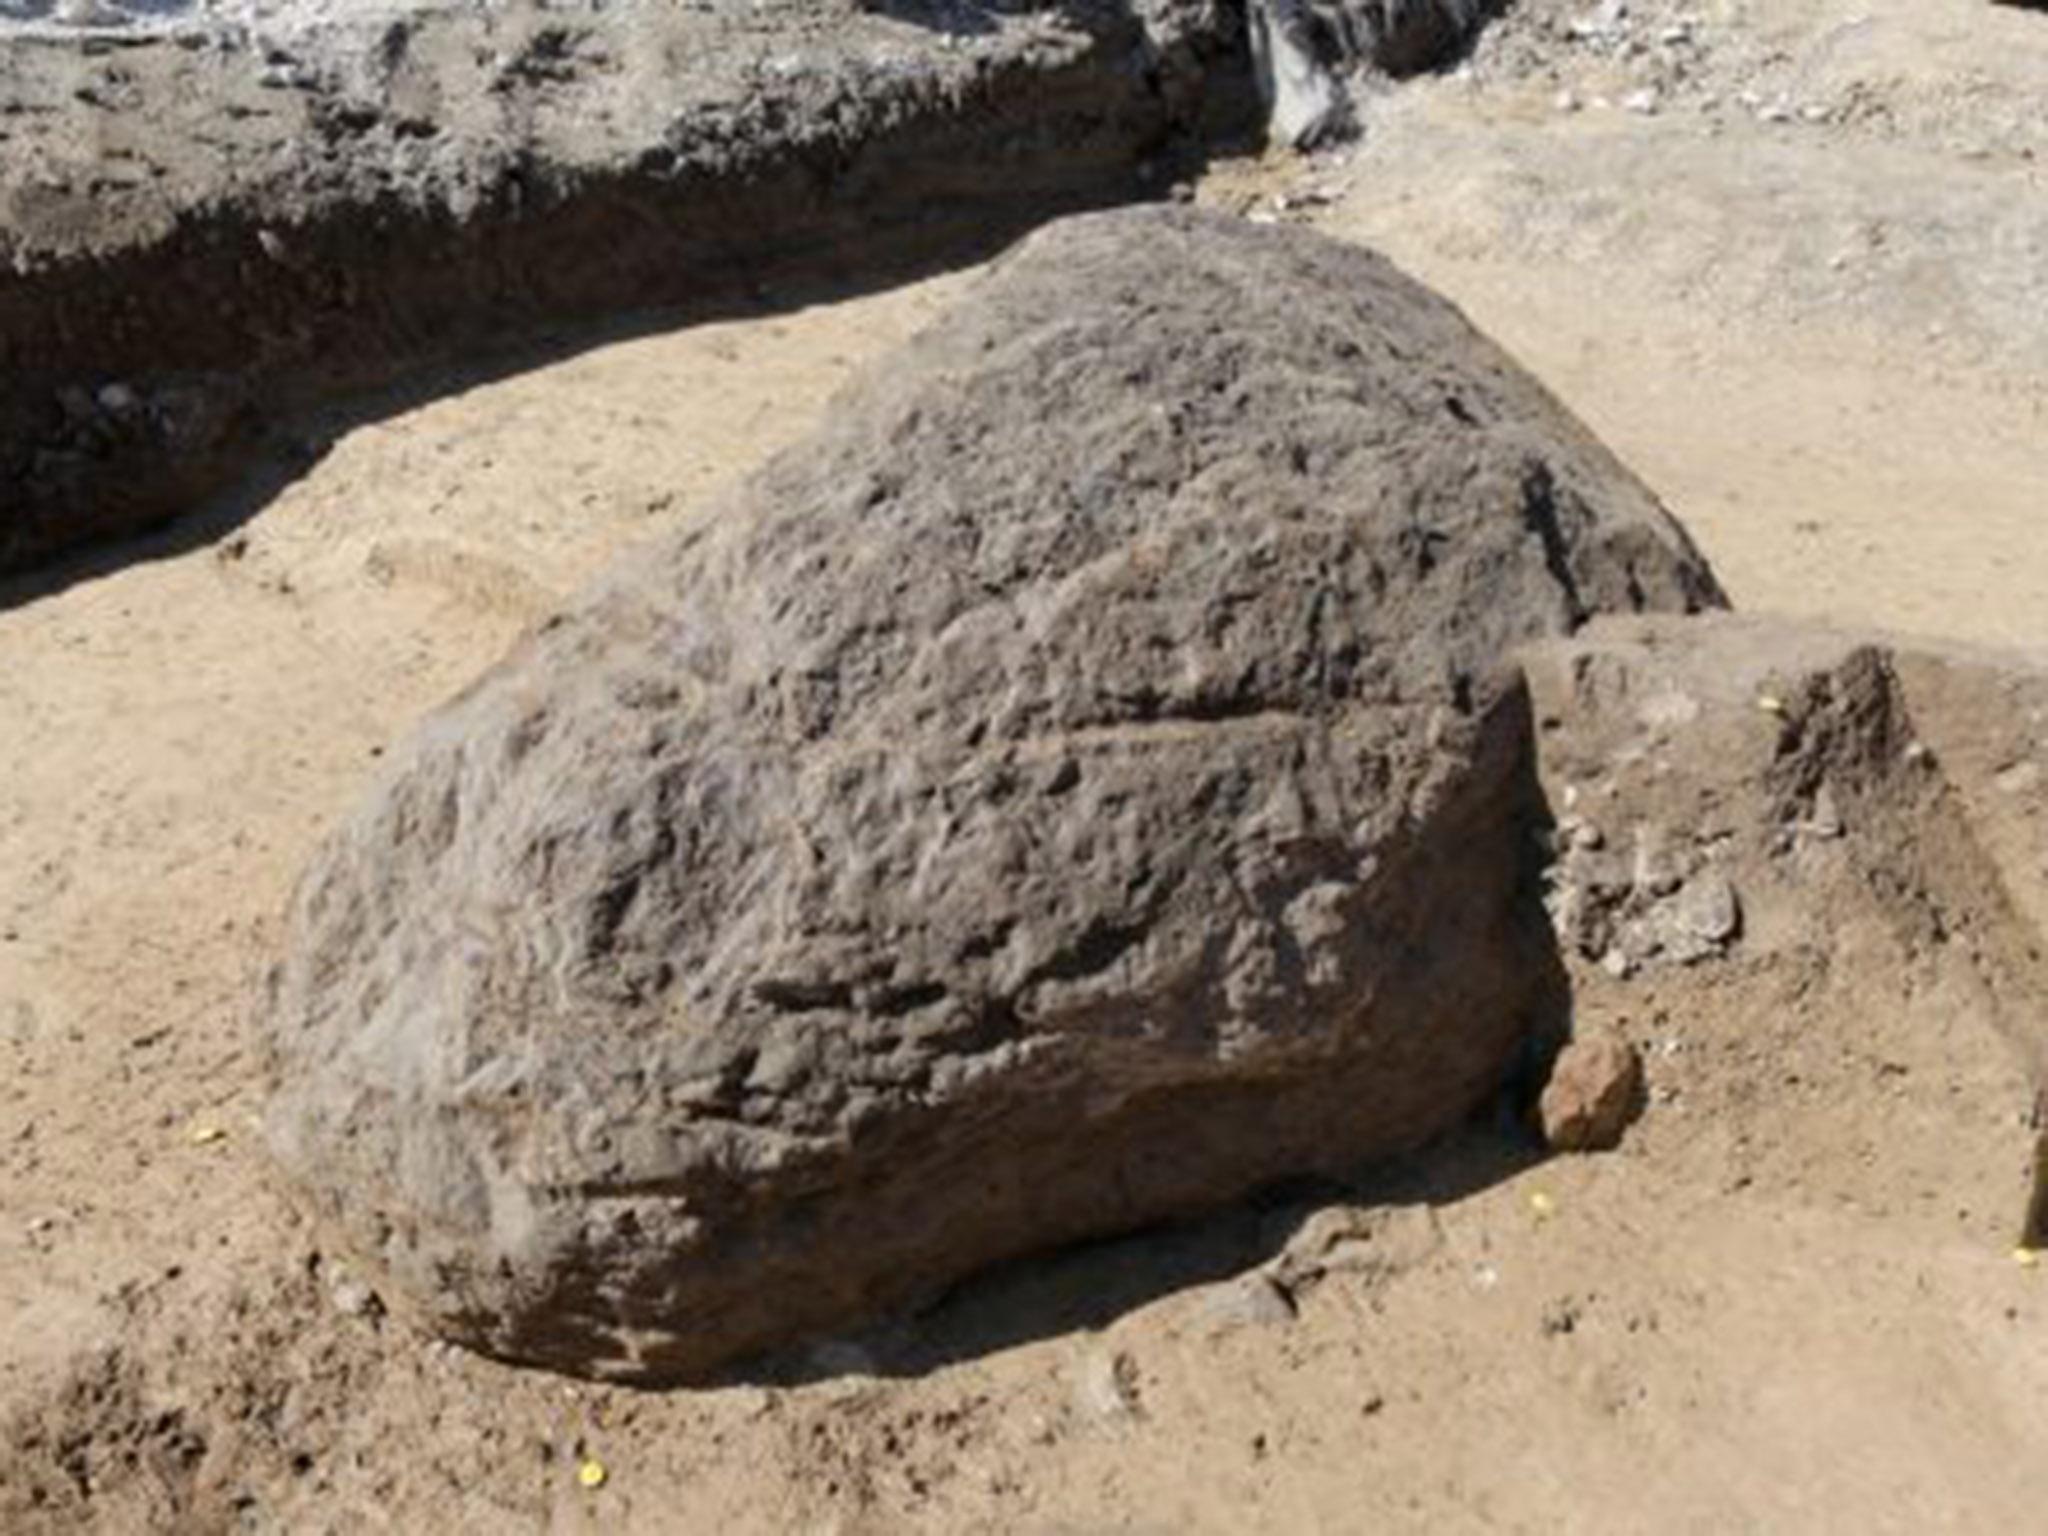 The stone is believed to have once stood vertically because of markings found on the ground near it